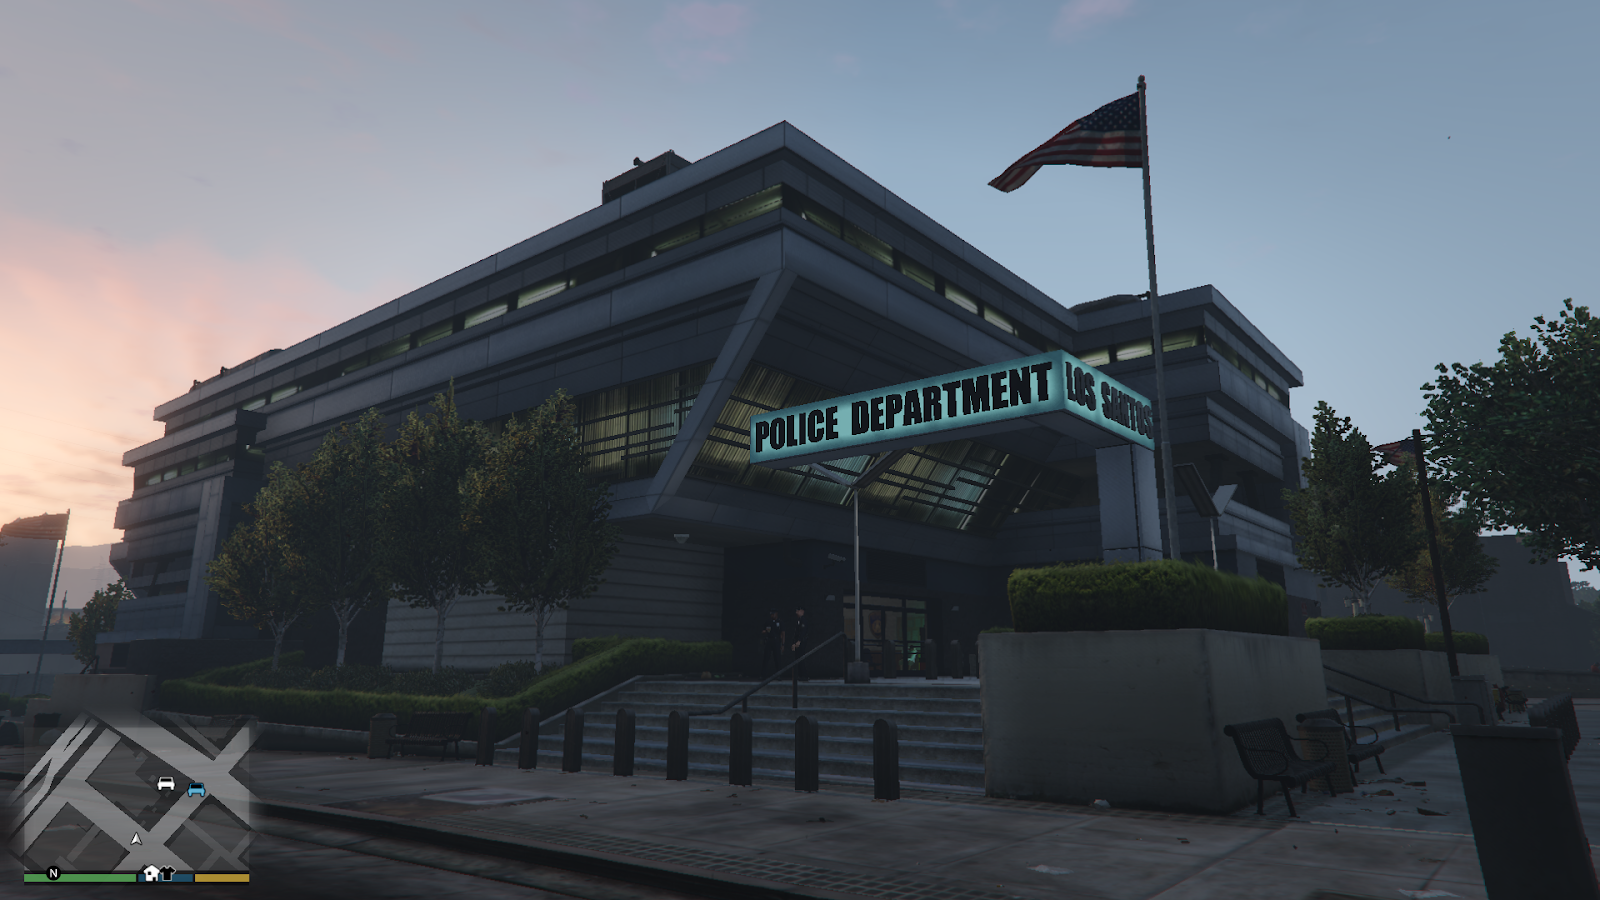 Where is Mission Row Police Station located in GTA 5?